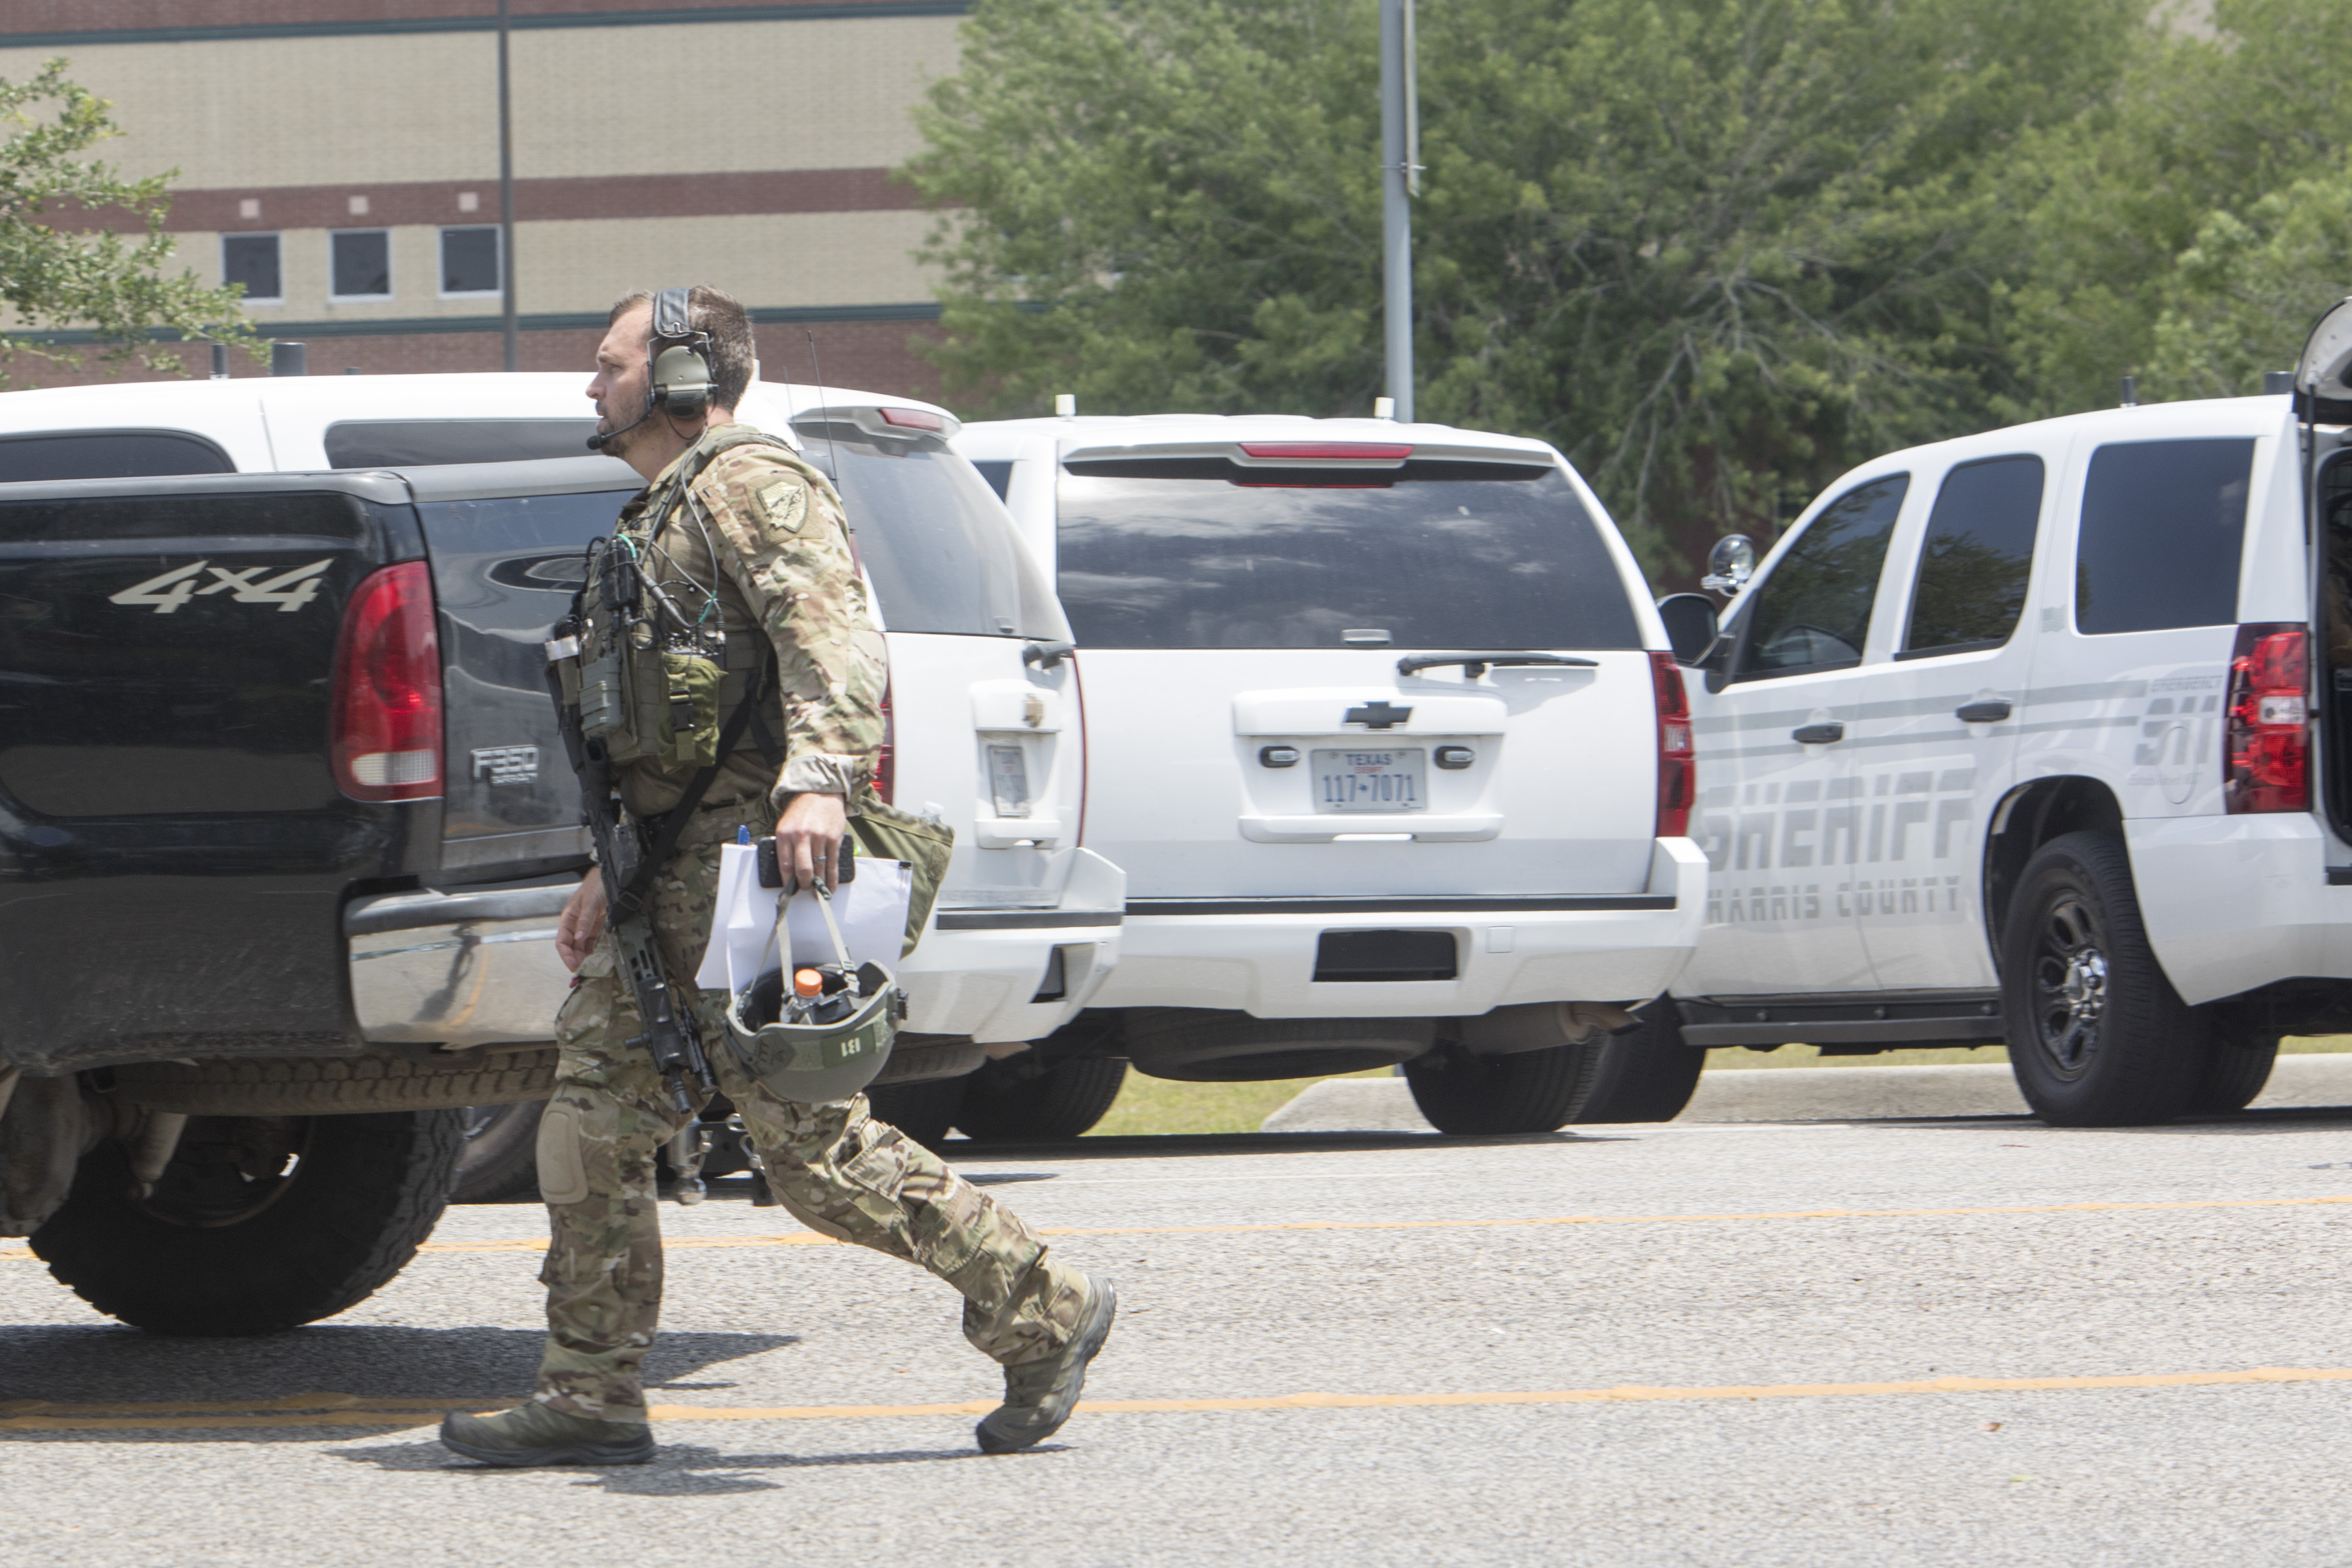 An FBI agent is seen in the parking lot of Santa Fe High School where at least ten people were killed on May 18, 2018 in Santa Fe, Texas. (Daniel Kramer—AFP/Getty Images)